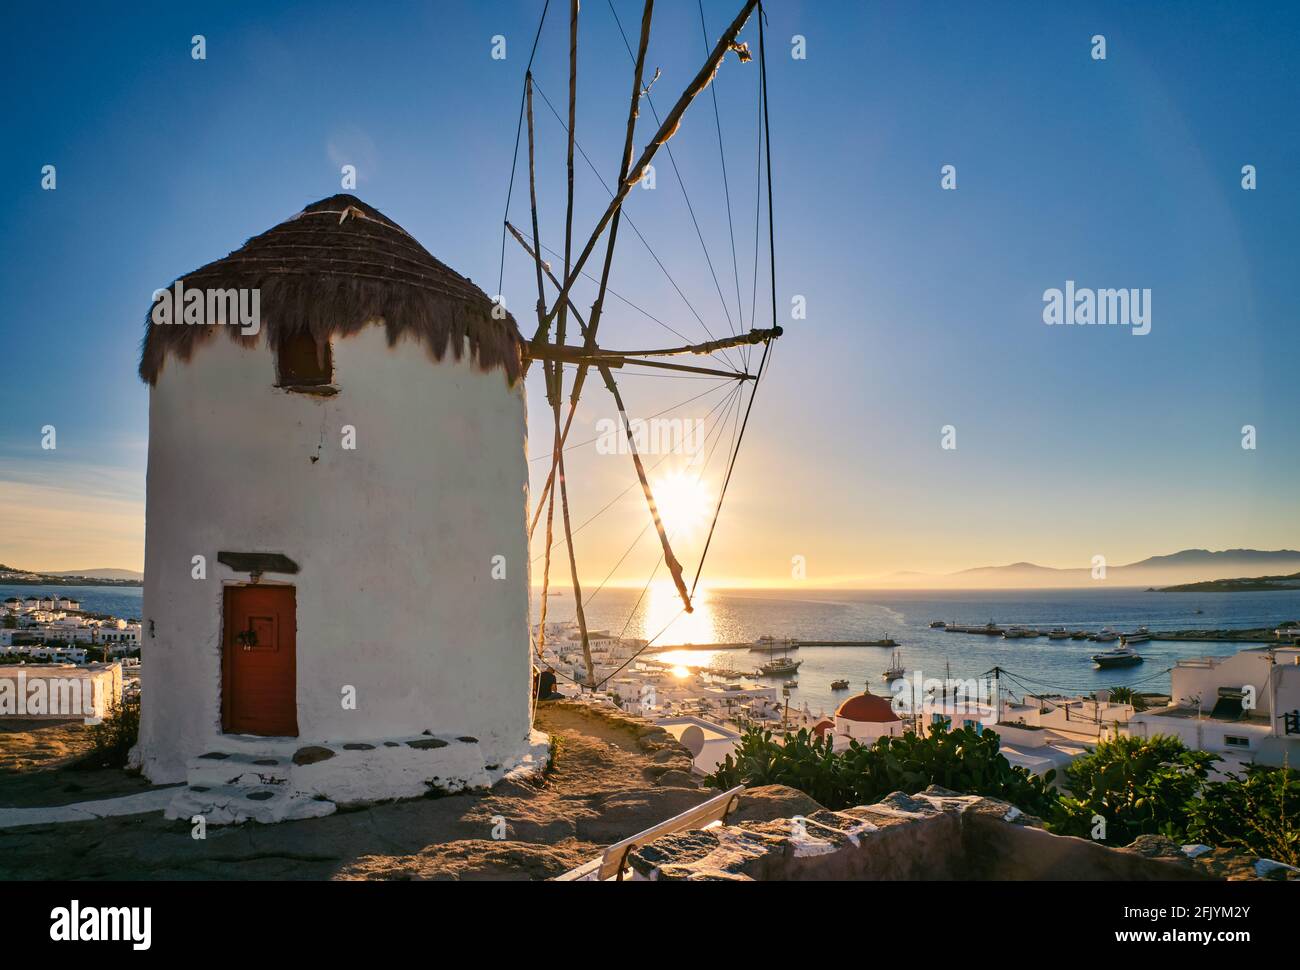 Romantic view of traditional Greek whitewashed windmill on hill. Chora town and harbor of Mykonos, Greece, low sun above sea horizon, sunset sky. Stock Photo